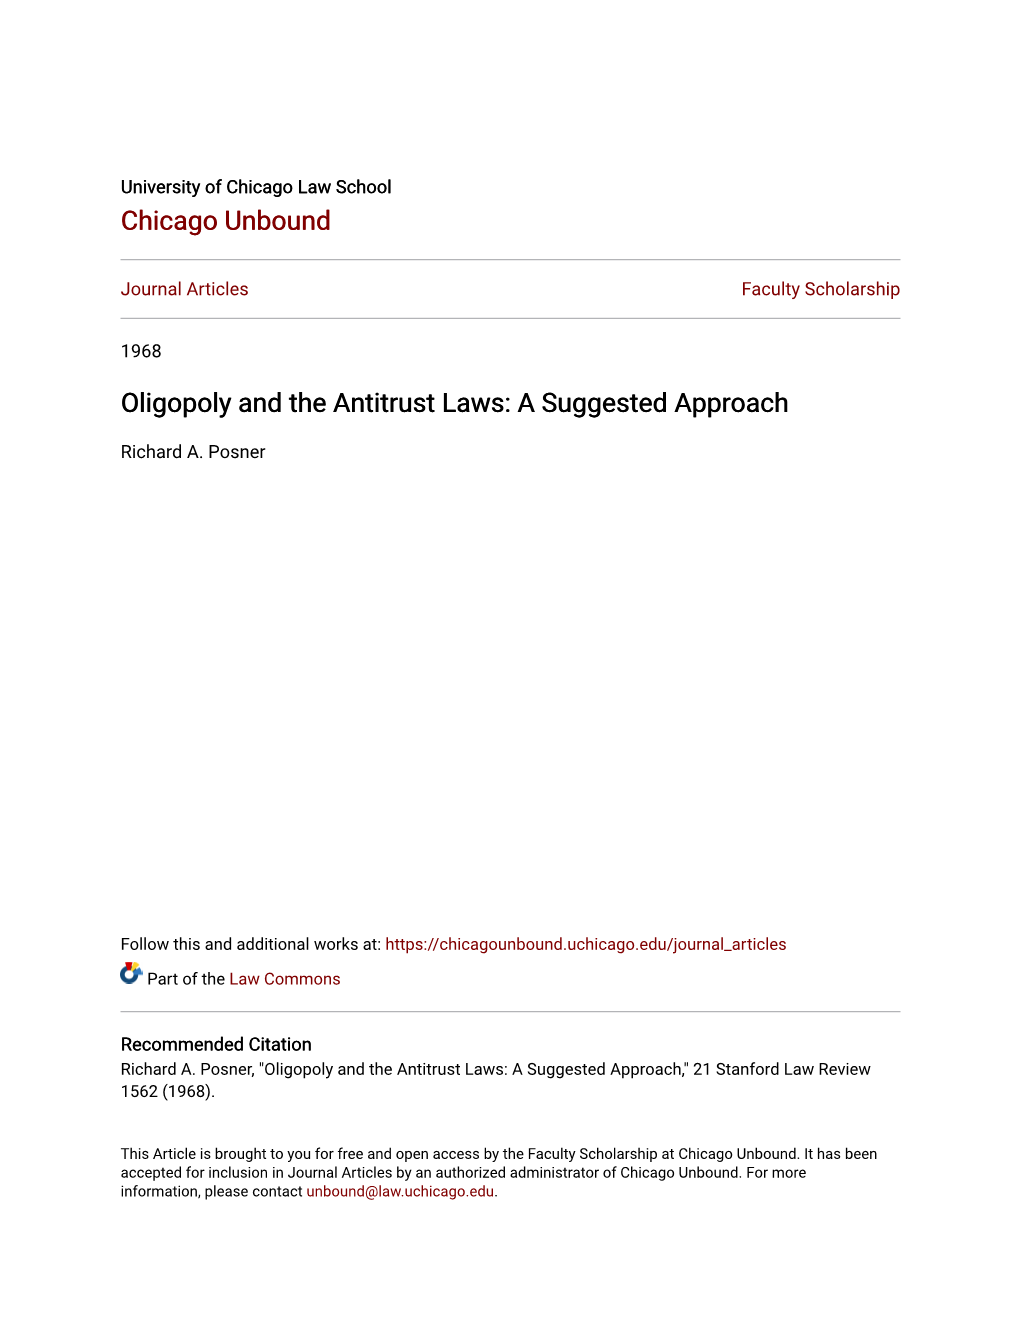 Oligopoly and the Antitrust Laws: a Suggested Approach